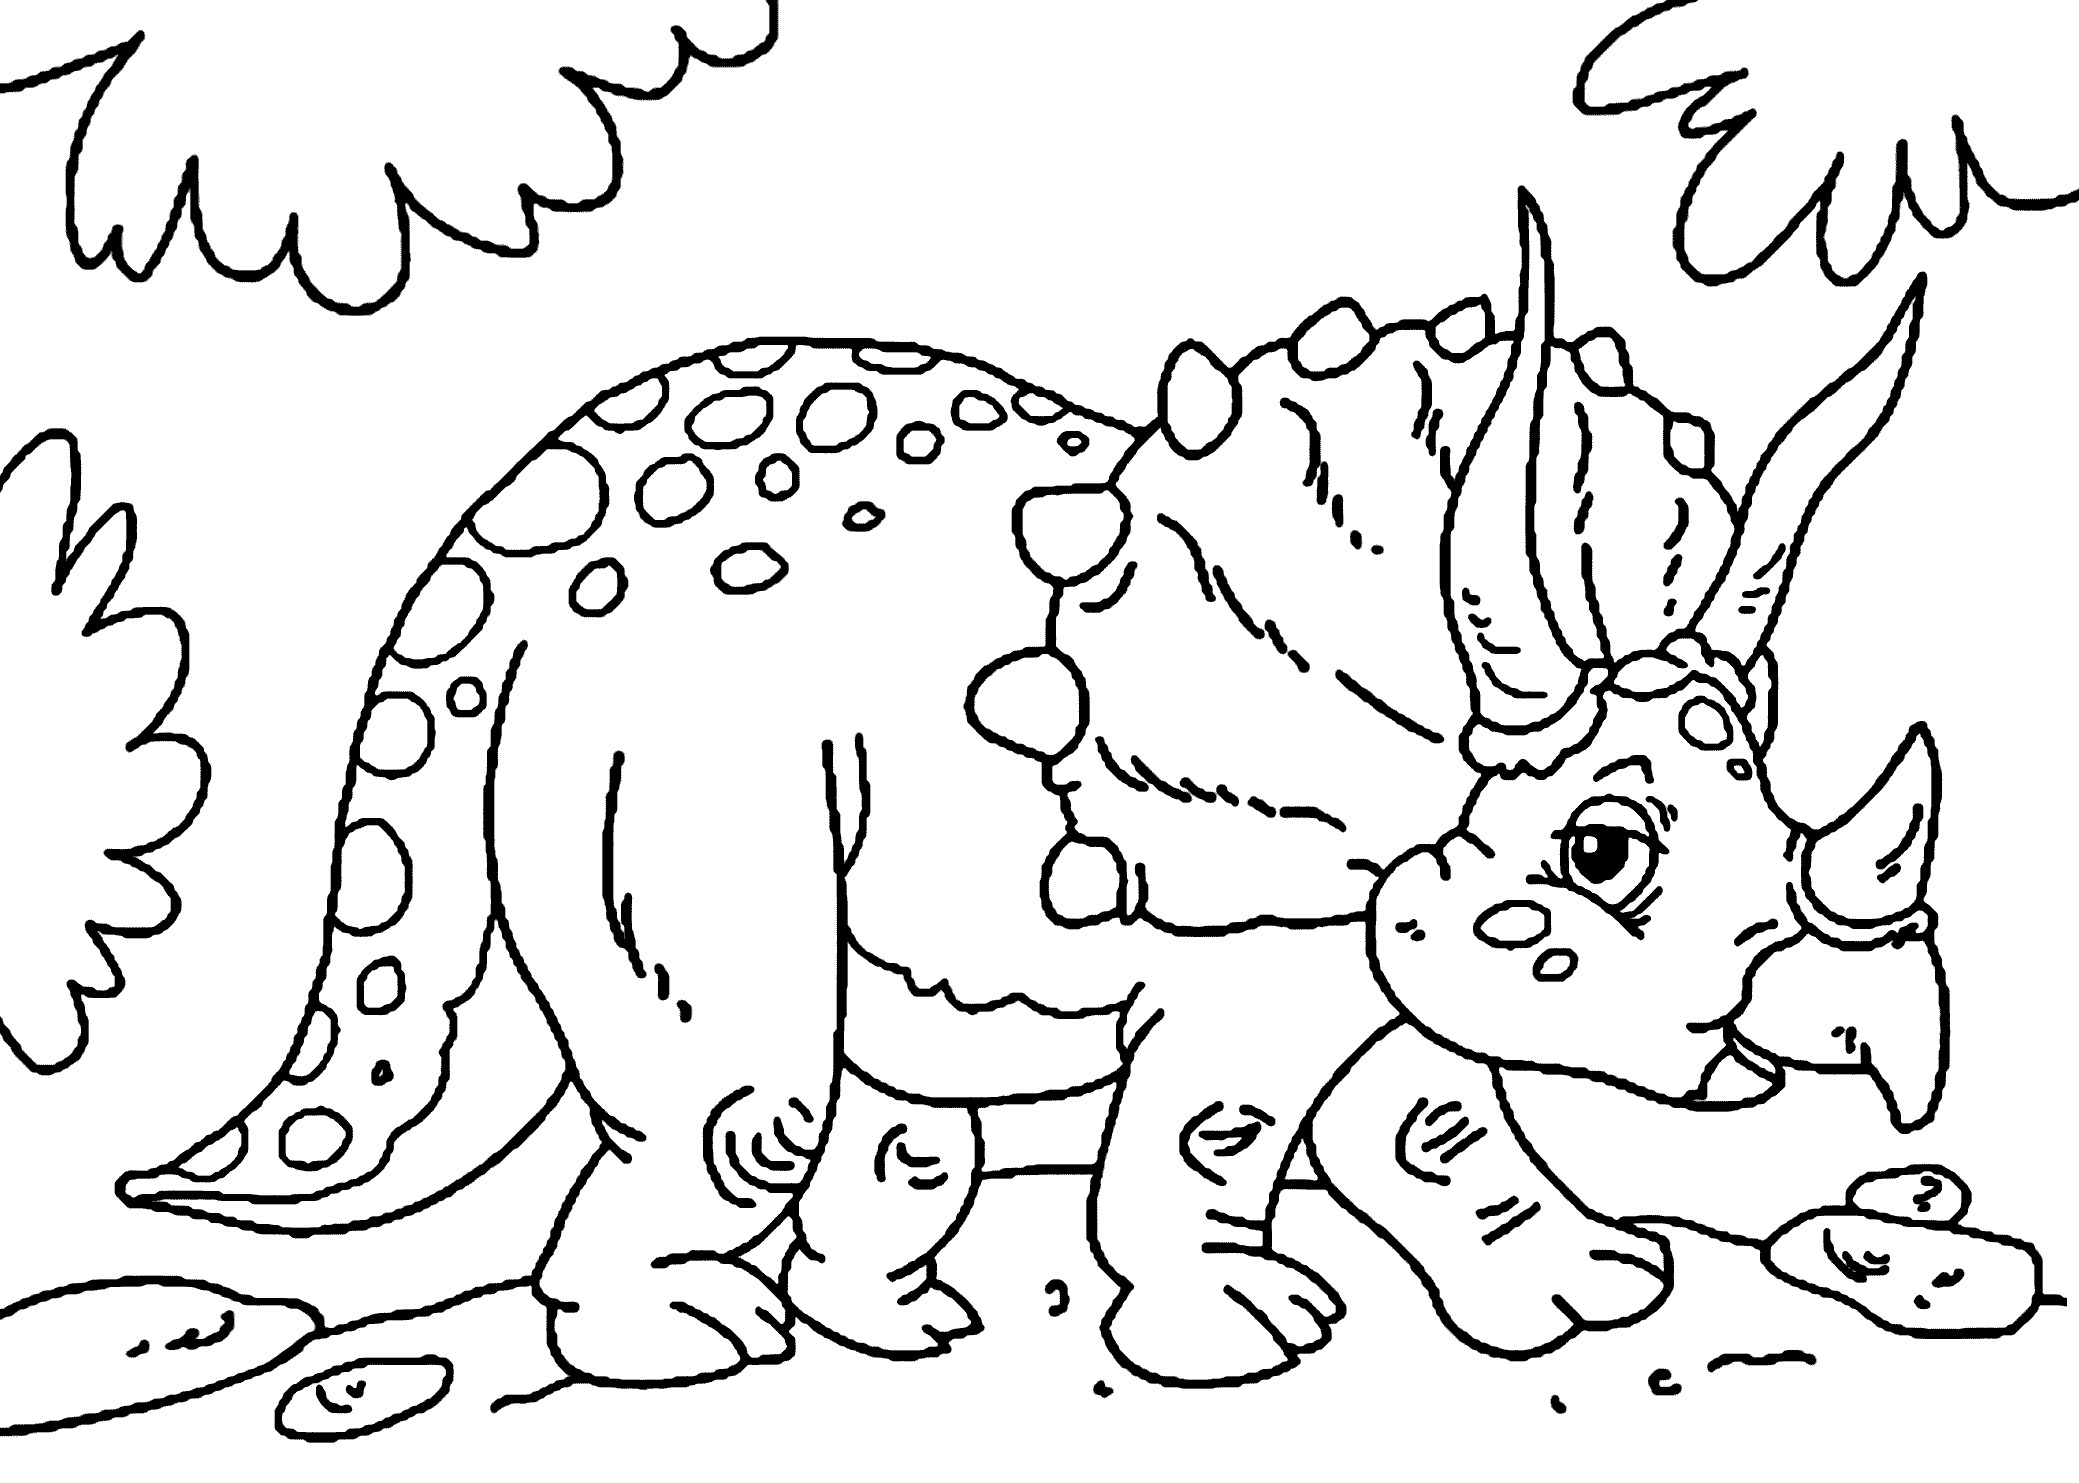 Coloring Pages For Boys Dinos
 Cute little triceratops dinosaur coloring pages for kids